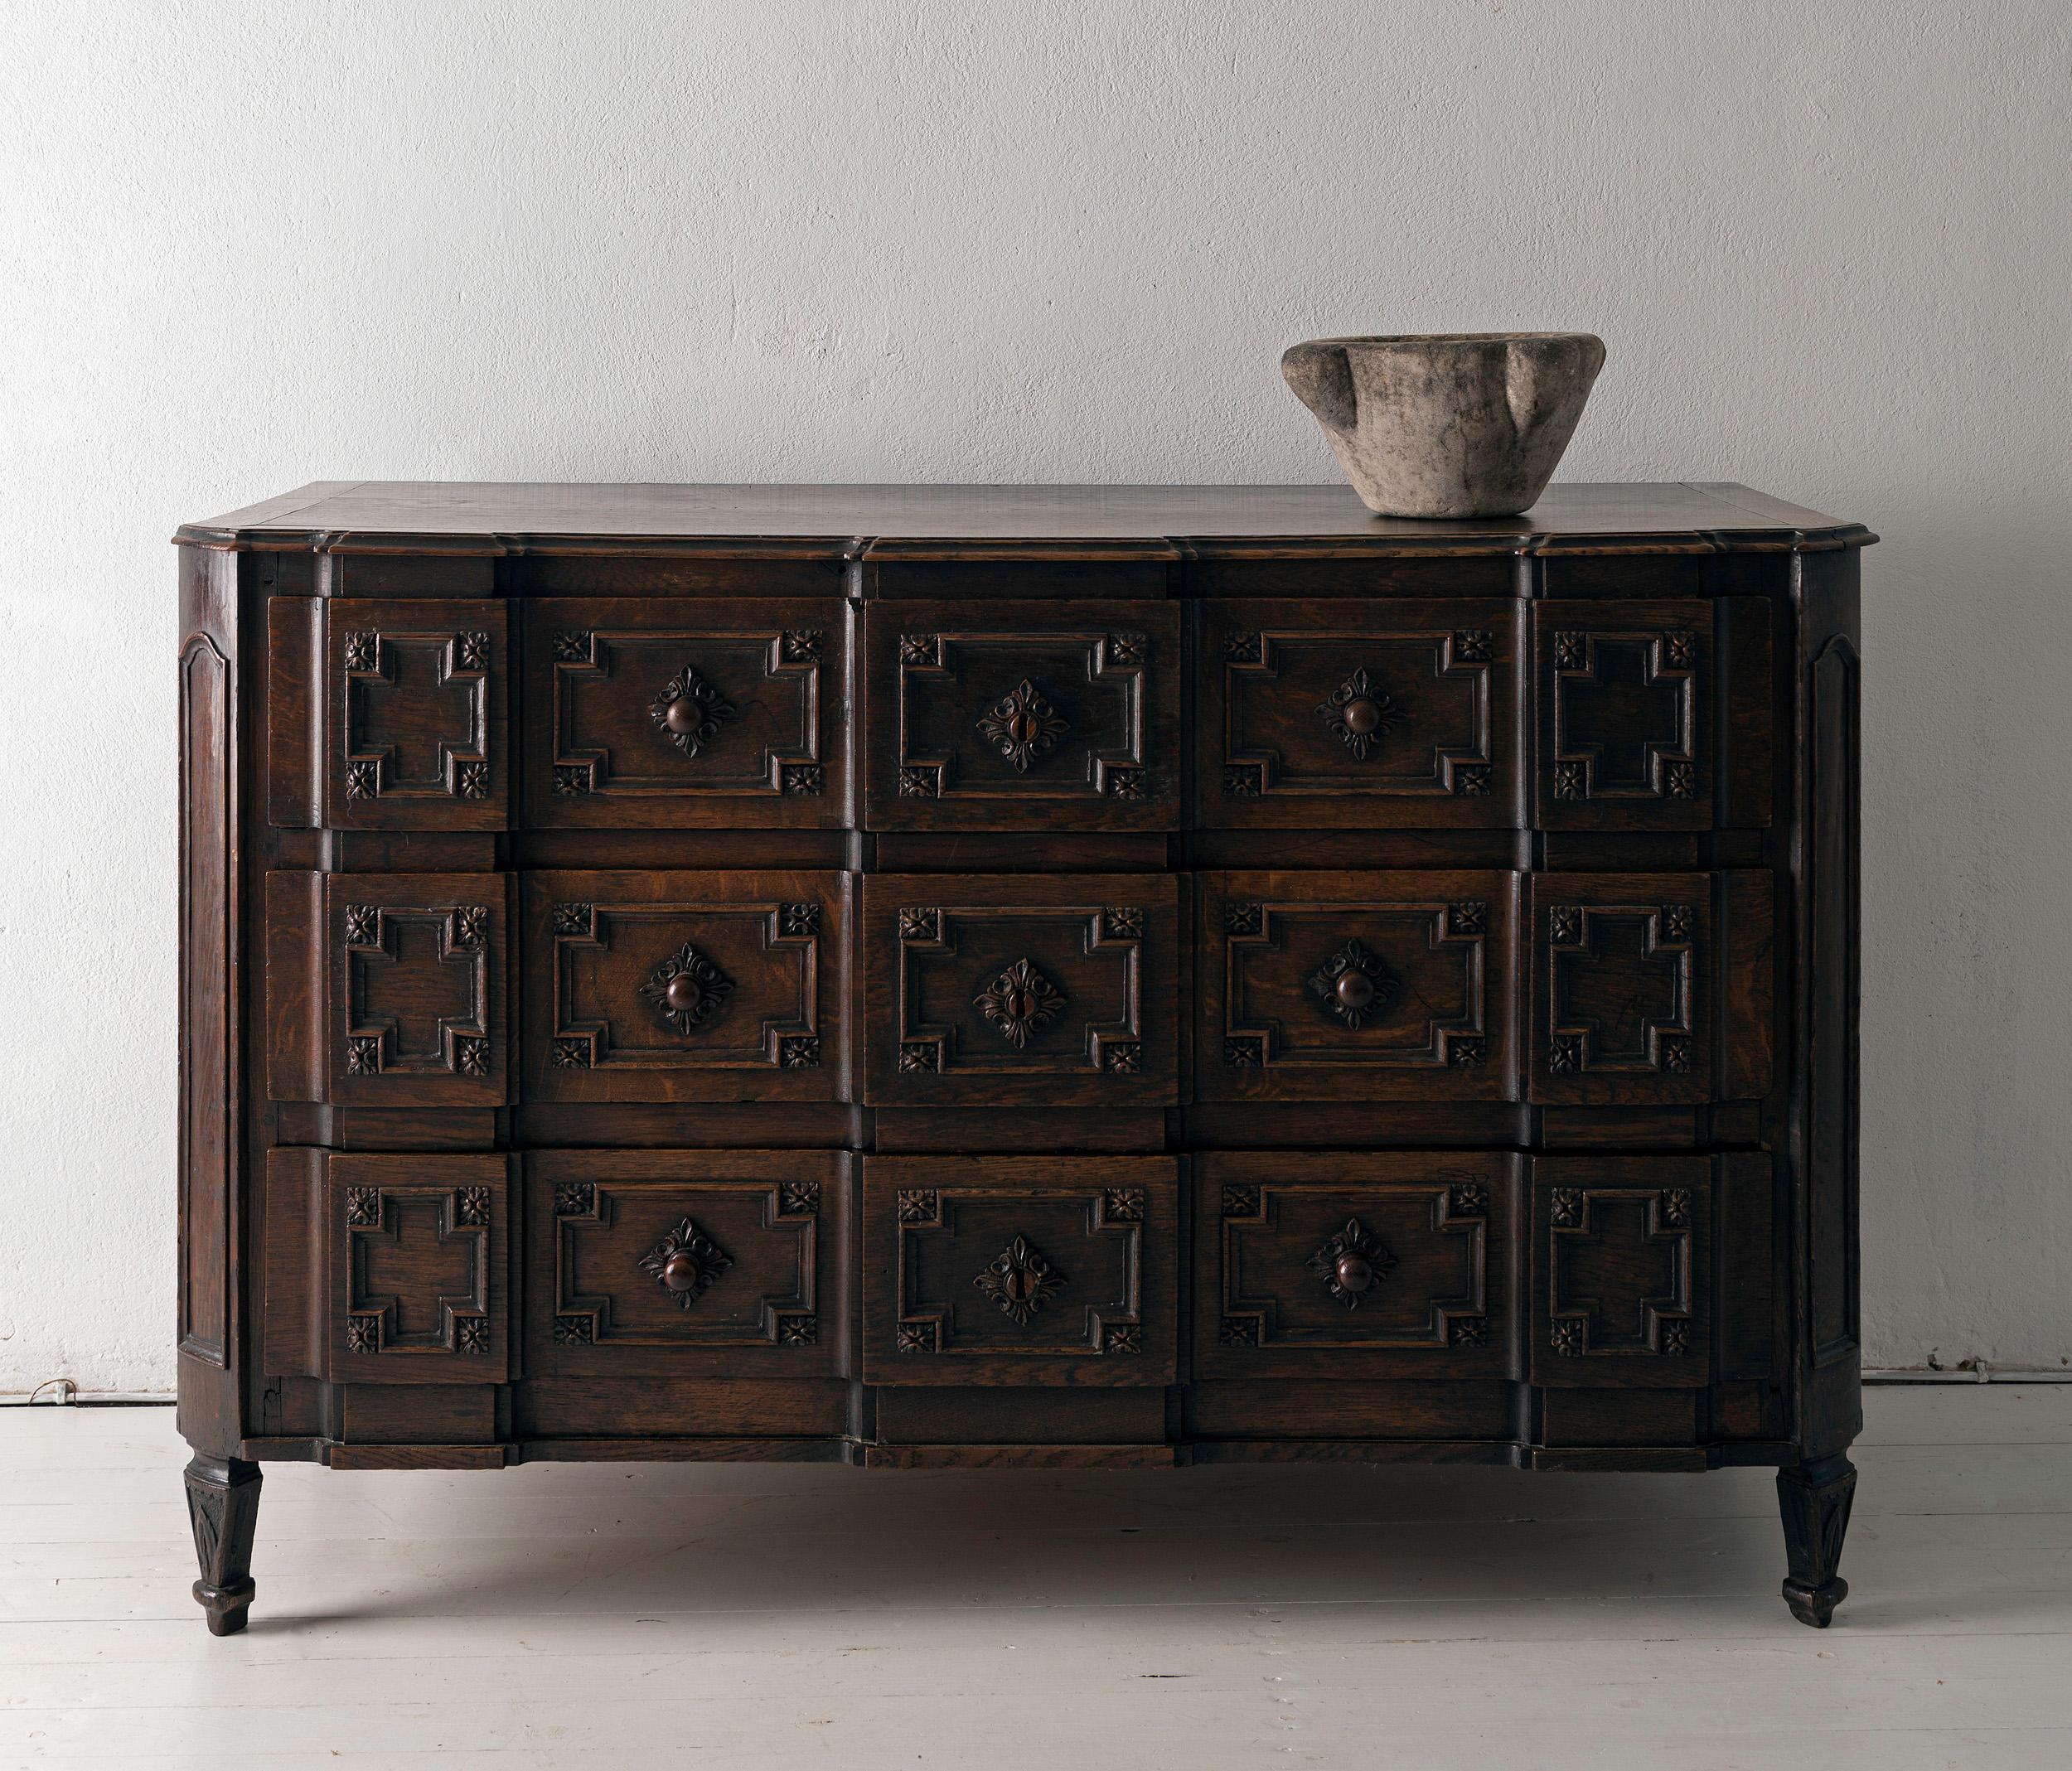 Outstanding Minimal Provencal chest of drawers, France 18th century, in Louis XIII Style but, ca. 1750.